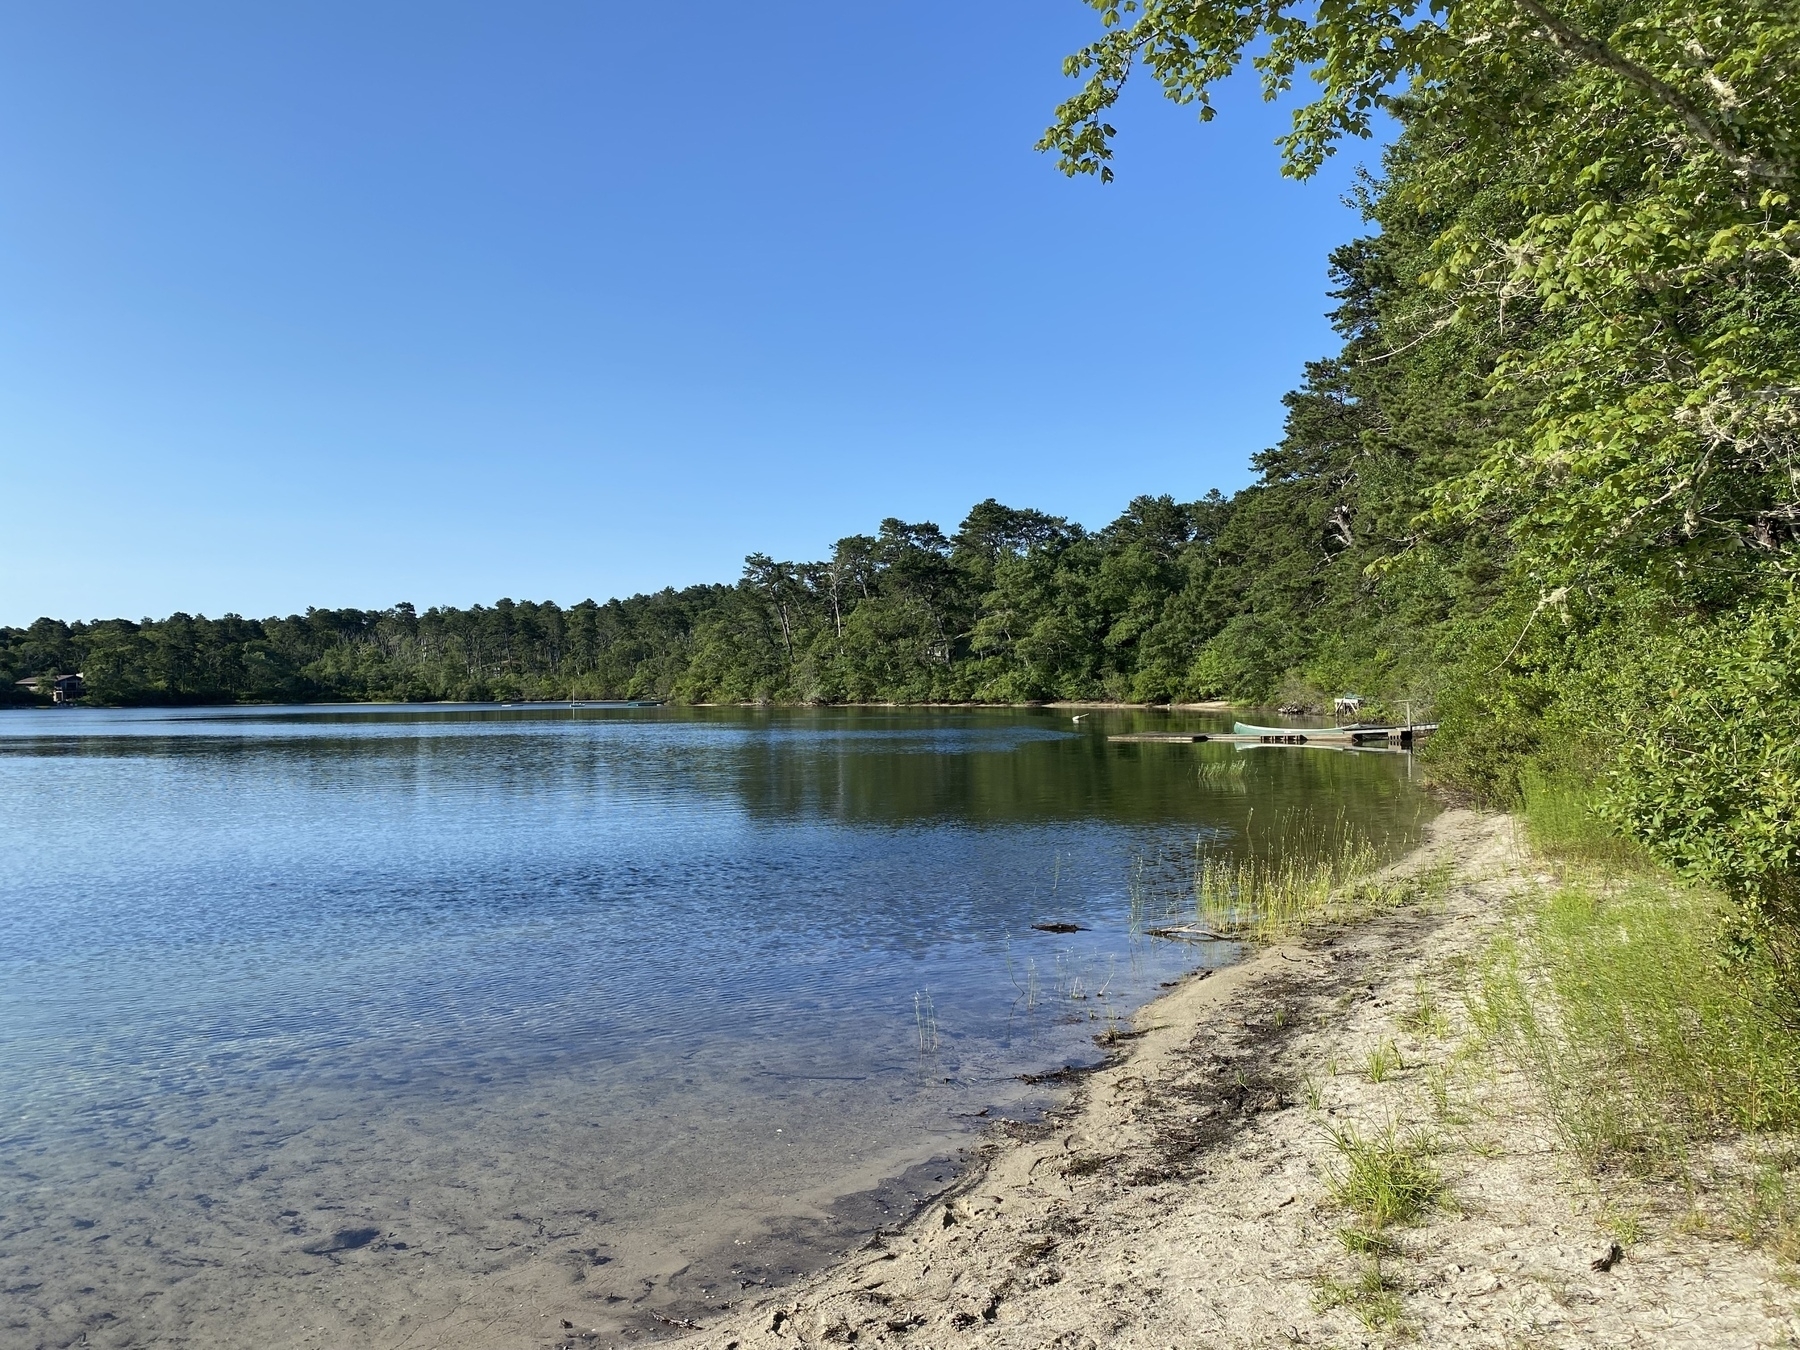 Afternoon view of a pond with a small beach in the foreground and trees lining the bank.